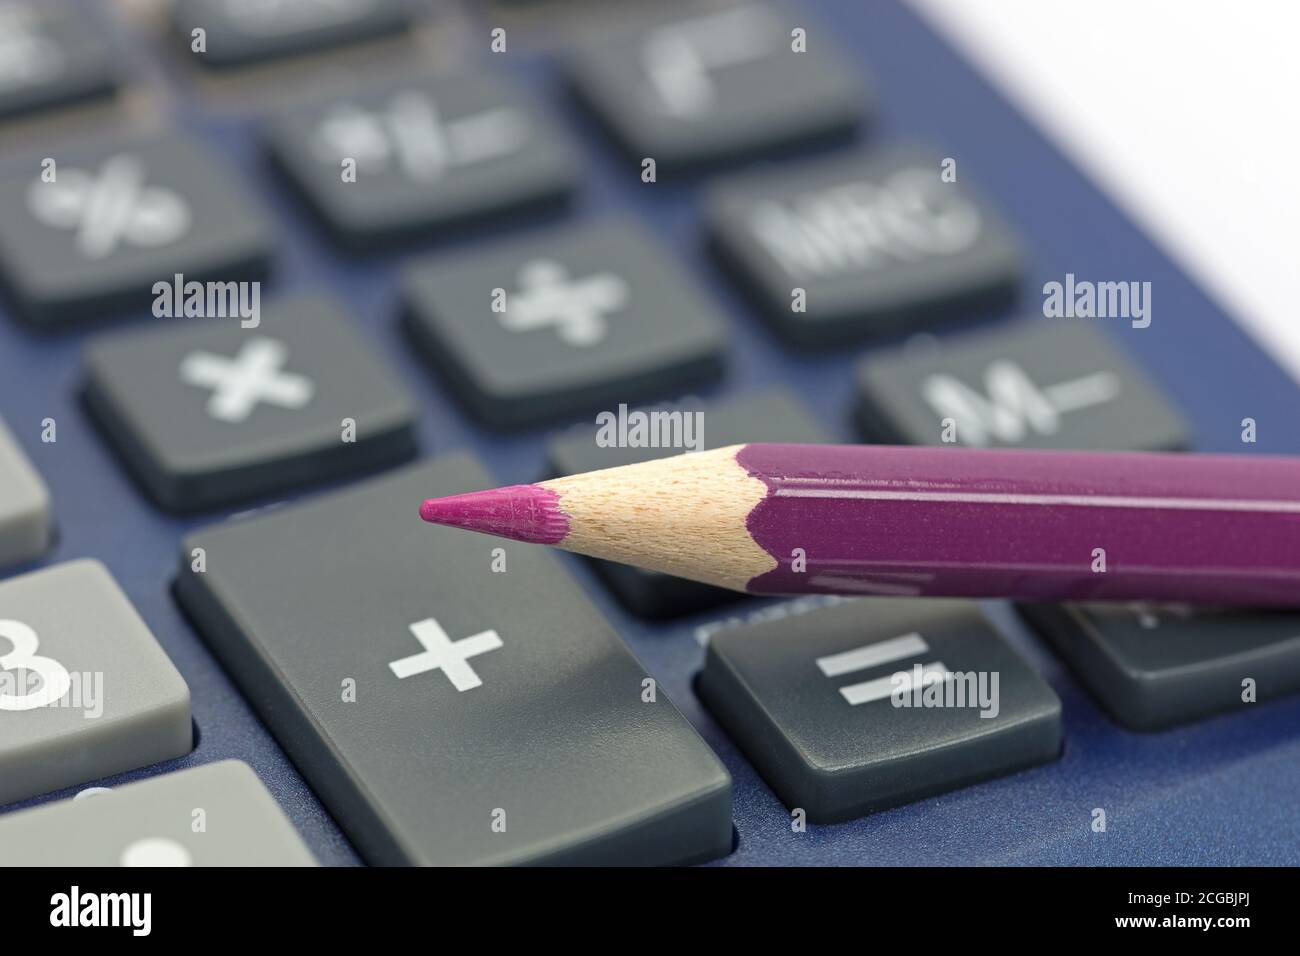 Red pen on a calculator Stock Photo